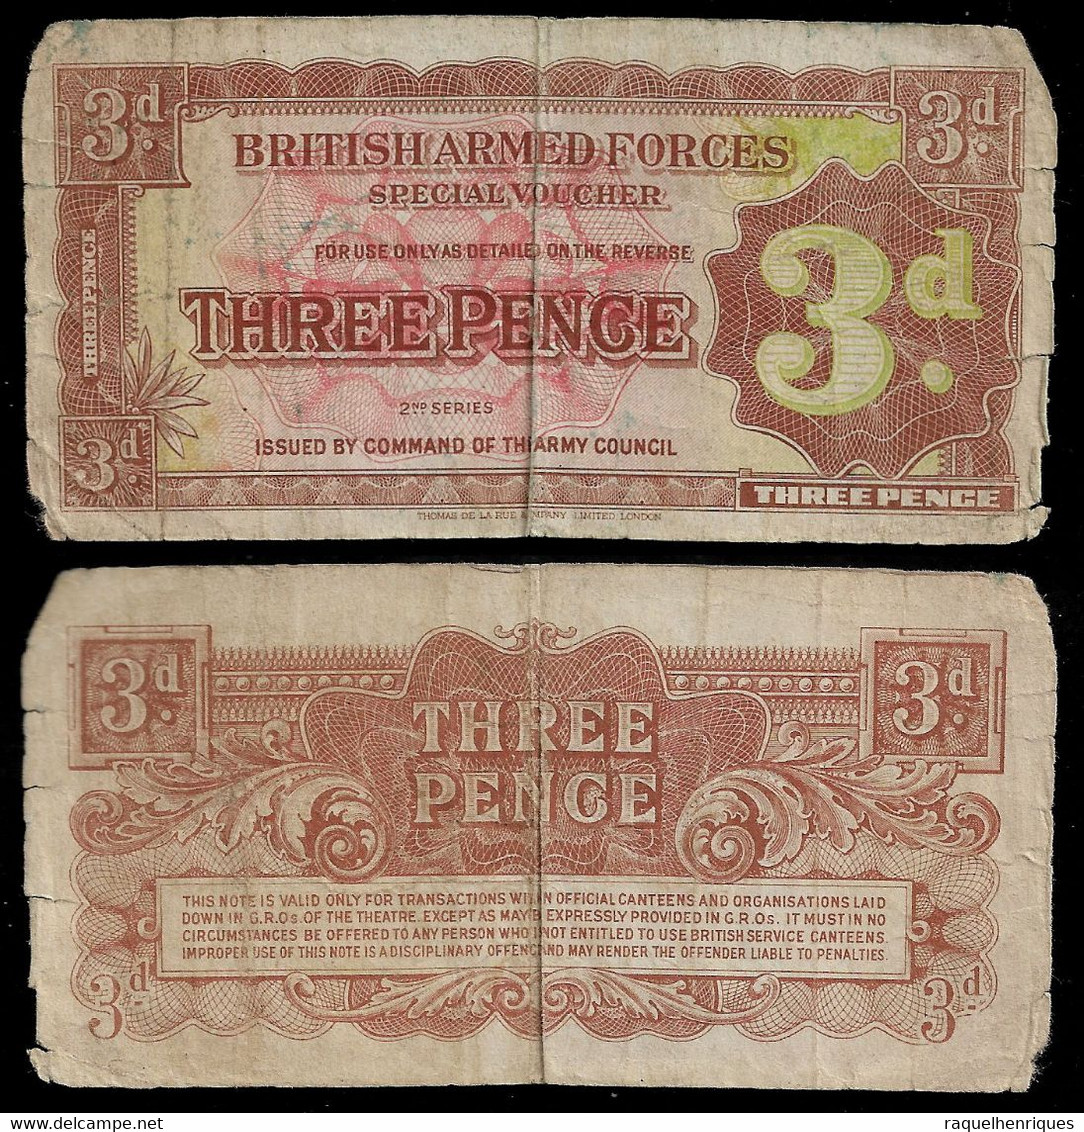 UNITED KINGDOM - GREAT BRITAIN - BRITISH ARMED FORCES BANKNOTE - 3 PENCE 2nd SERIES 1948 VG (NT#04) - British Armed Forces & Special Vouchers